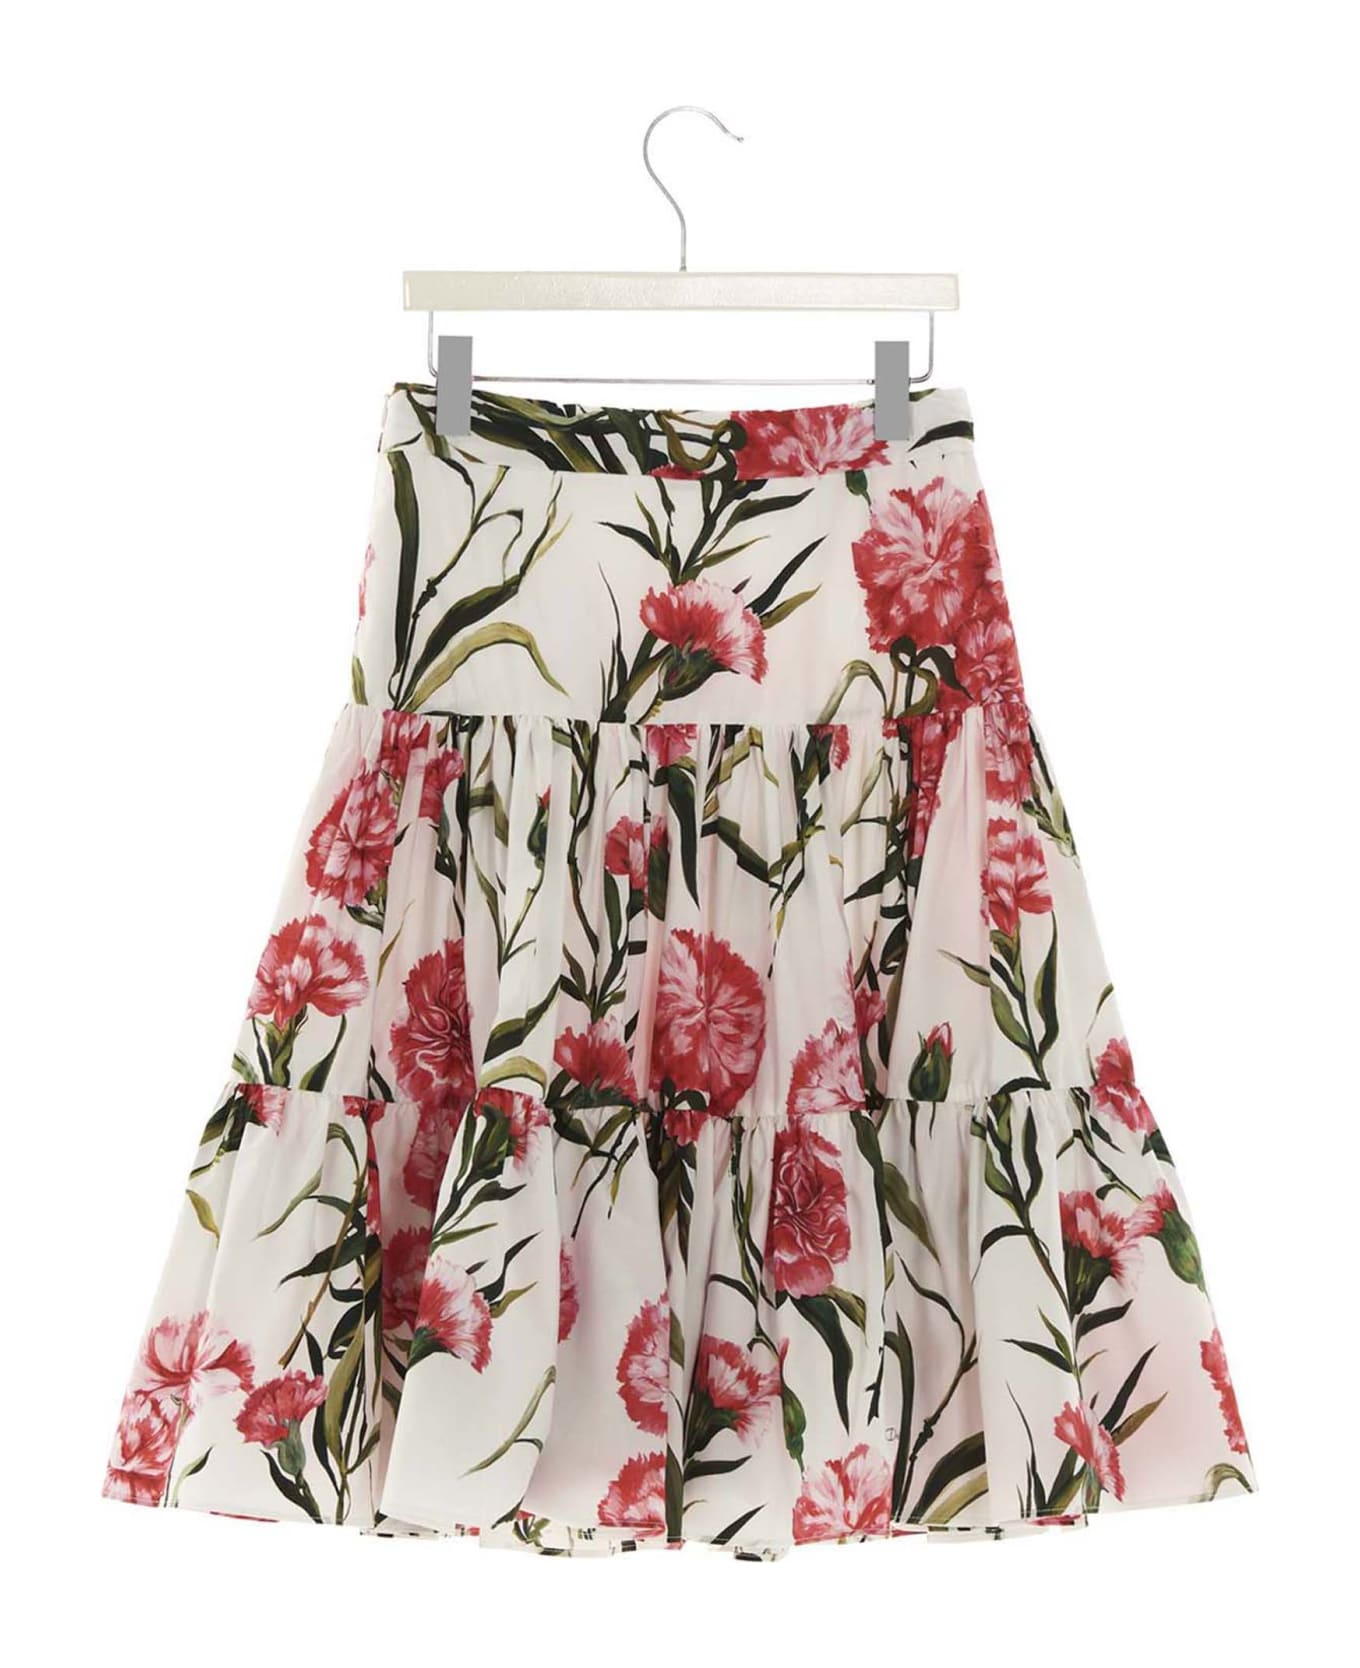 Dolce & Gabbana Floral Skirt - Multicolor ボトムス